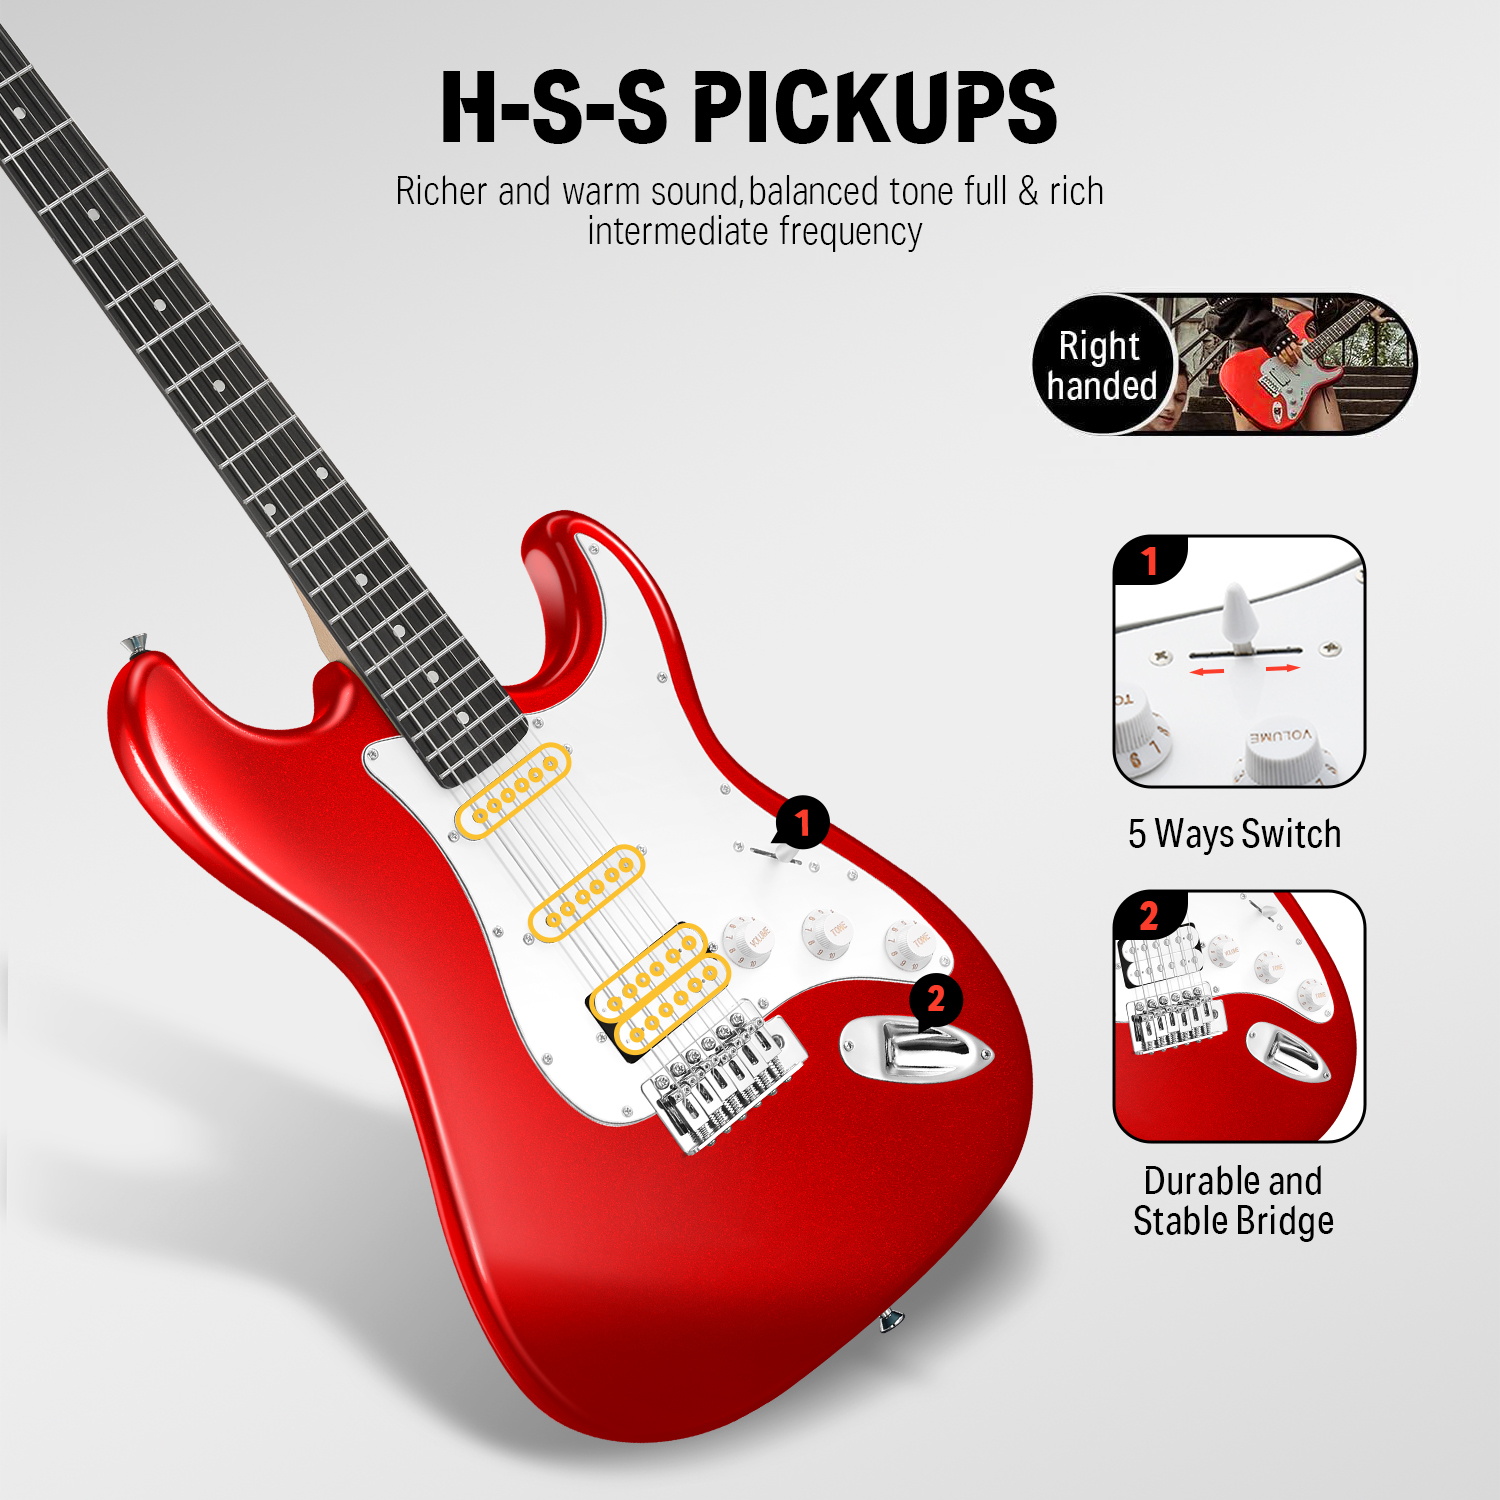 Donner 39" Electric Guitar Beginner Kit Solid Body Full Size Red HSS Pick Up for Starter, with Amplifier, Bag, Digital Tuner, Capo, Strap, String,Cable, Picks DST-102R - image 3 of 13